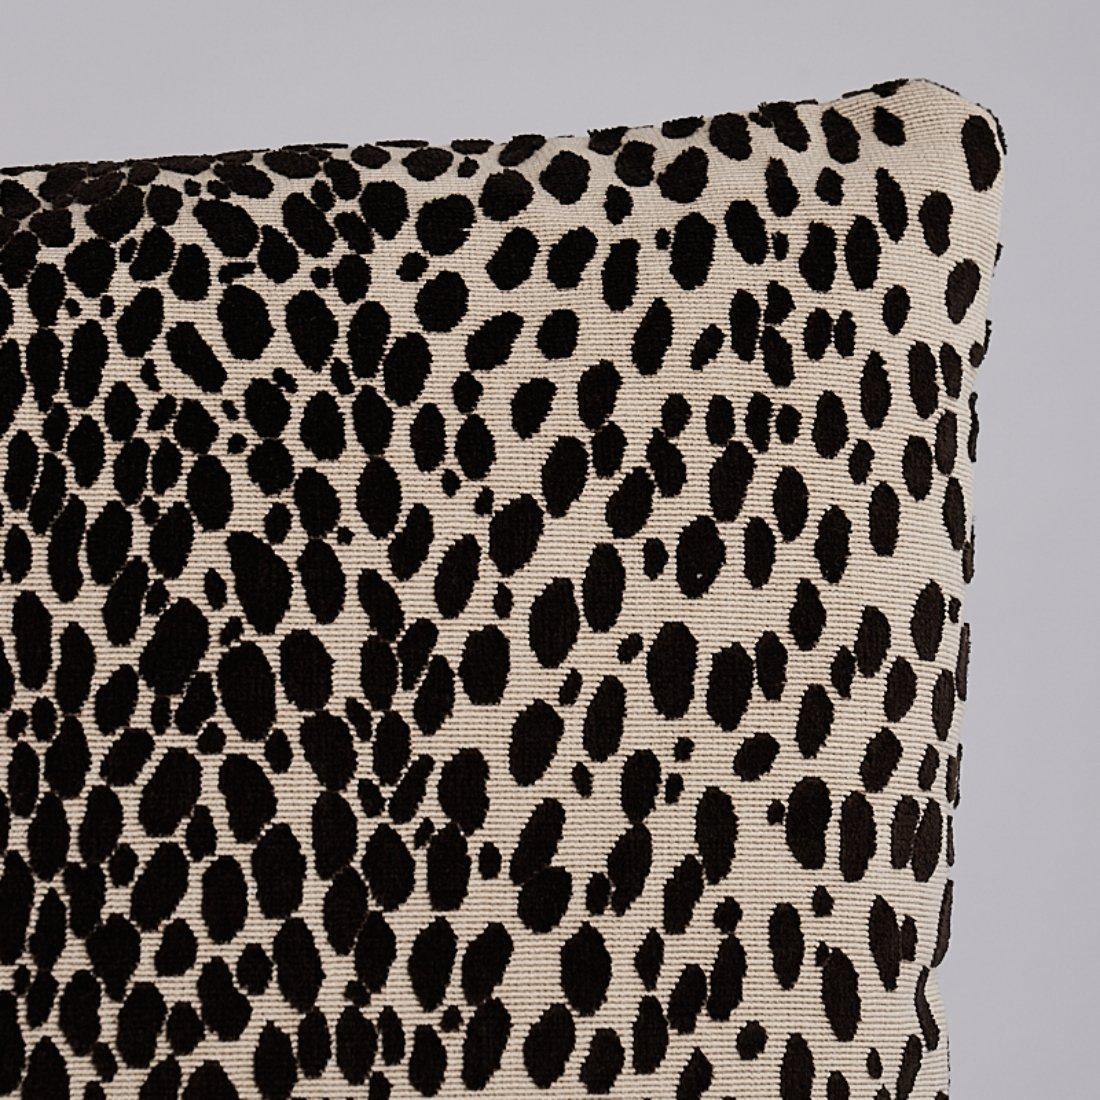 This pillow features Cheetah Velvet with a knife edge finish. A small-scale design with a big repeat, this wildly chic, cut velvet animal pattern stands out against a looped ground. Pillow includes a feather/down fill insert and hidden zipper